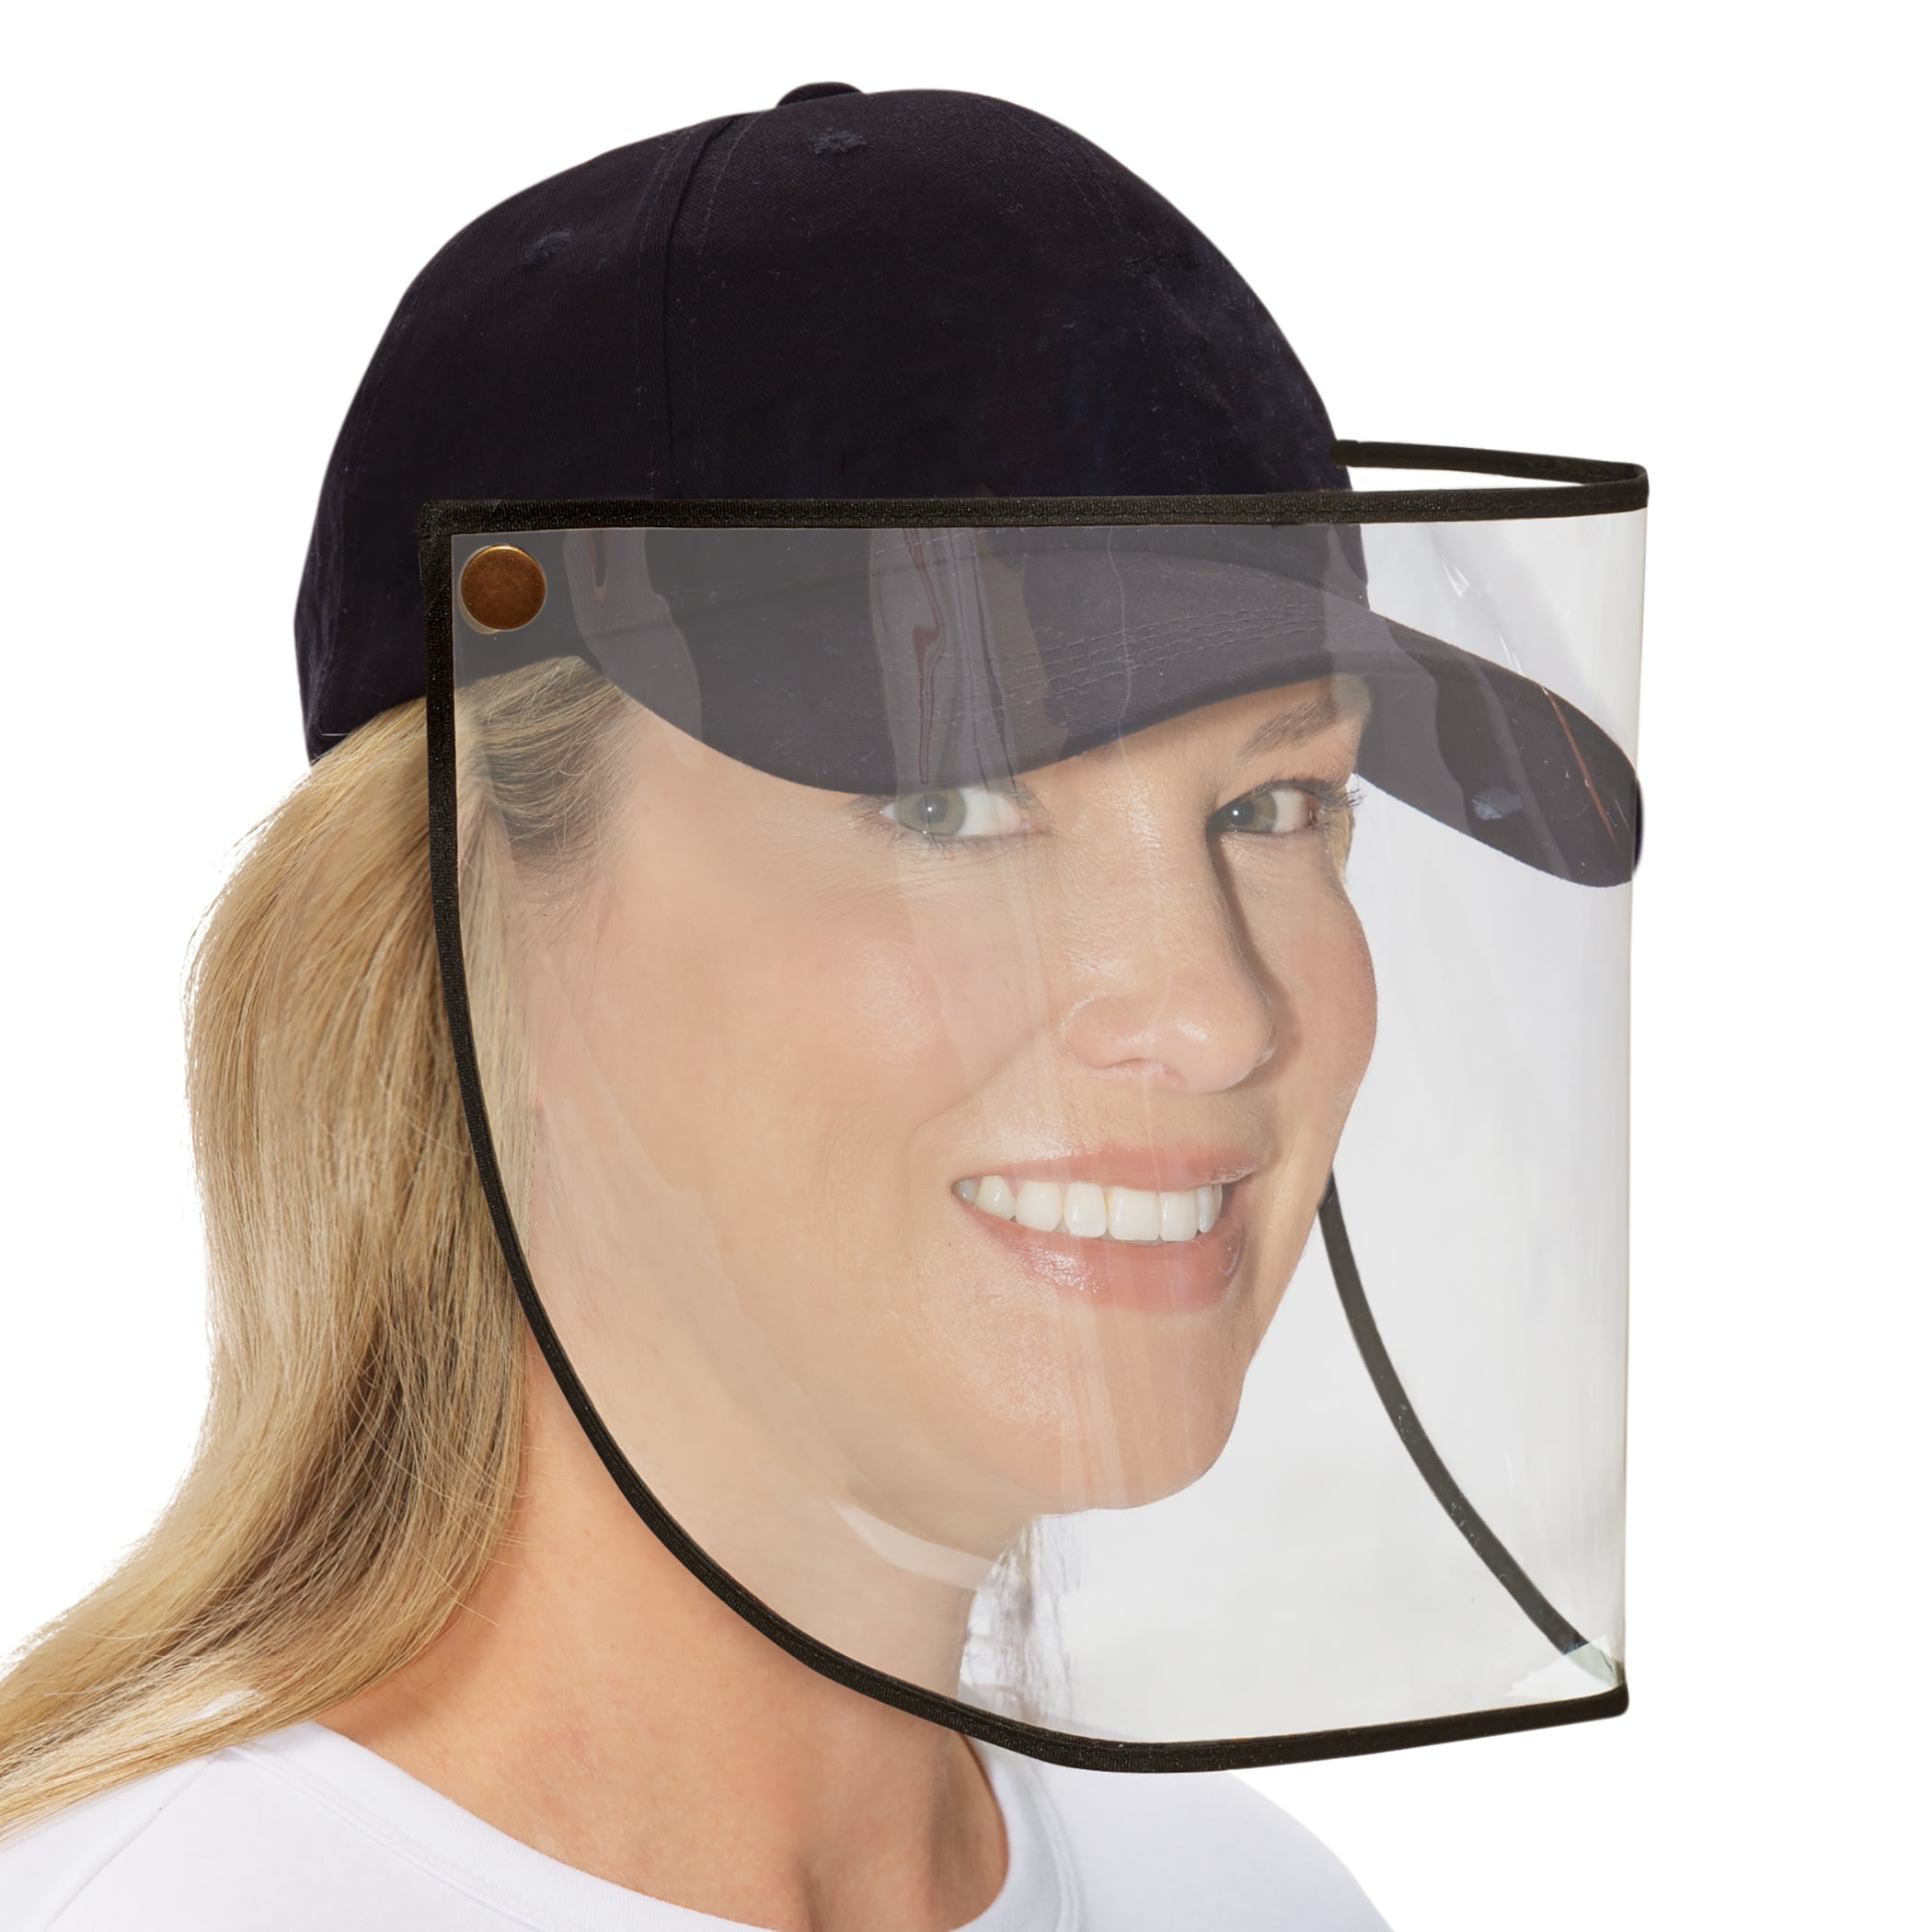 Removable Face Shield hat Facial Cover Cap Safety Baseball Sun Protective Hat 